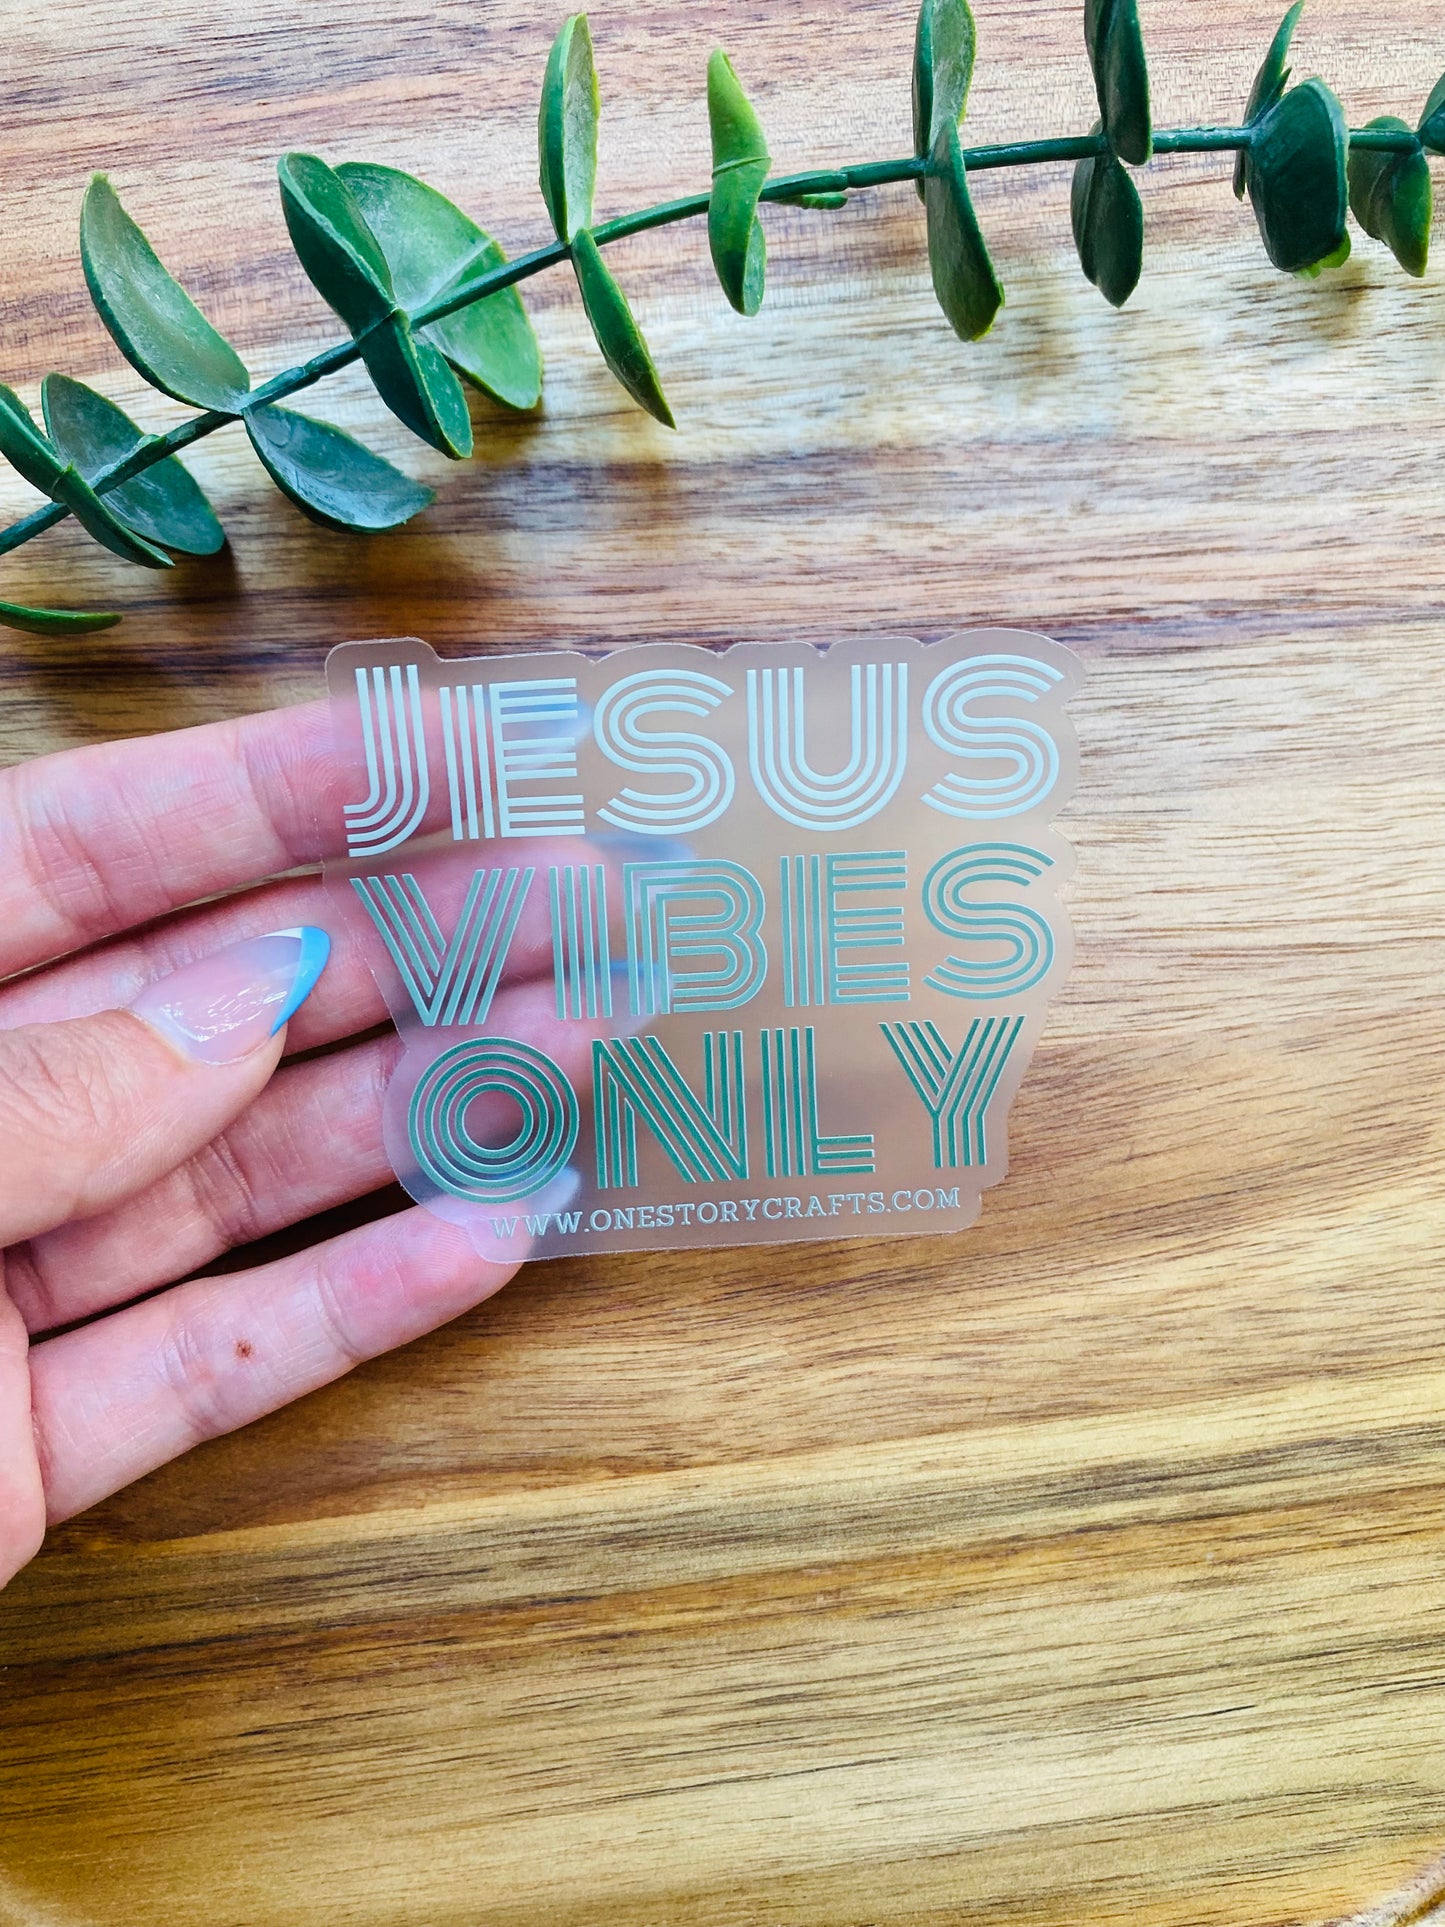 CLEAR Jesus Vibes Only Sticker